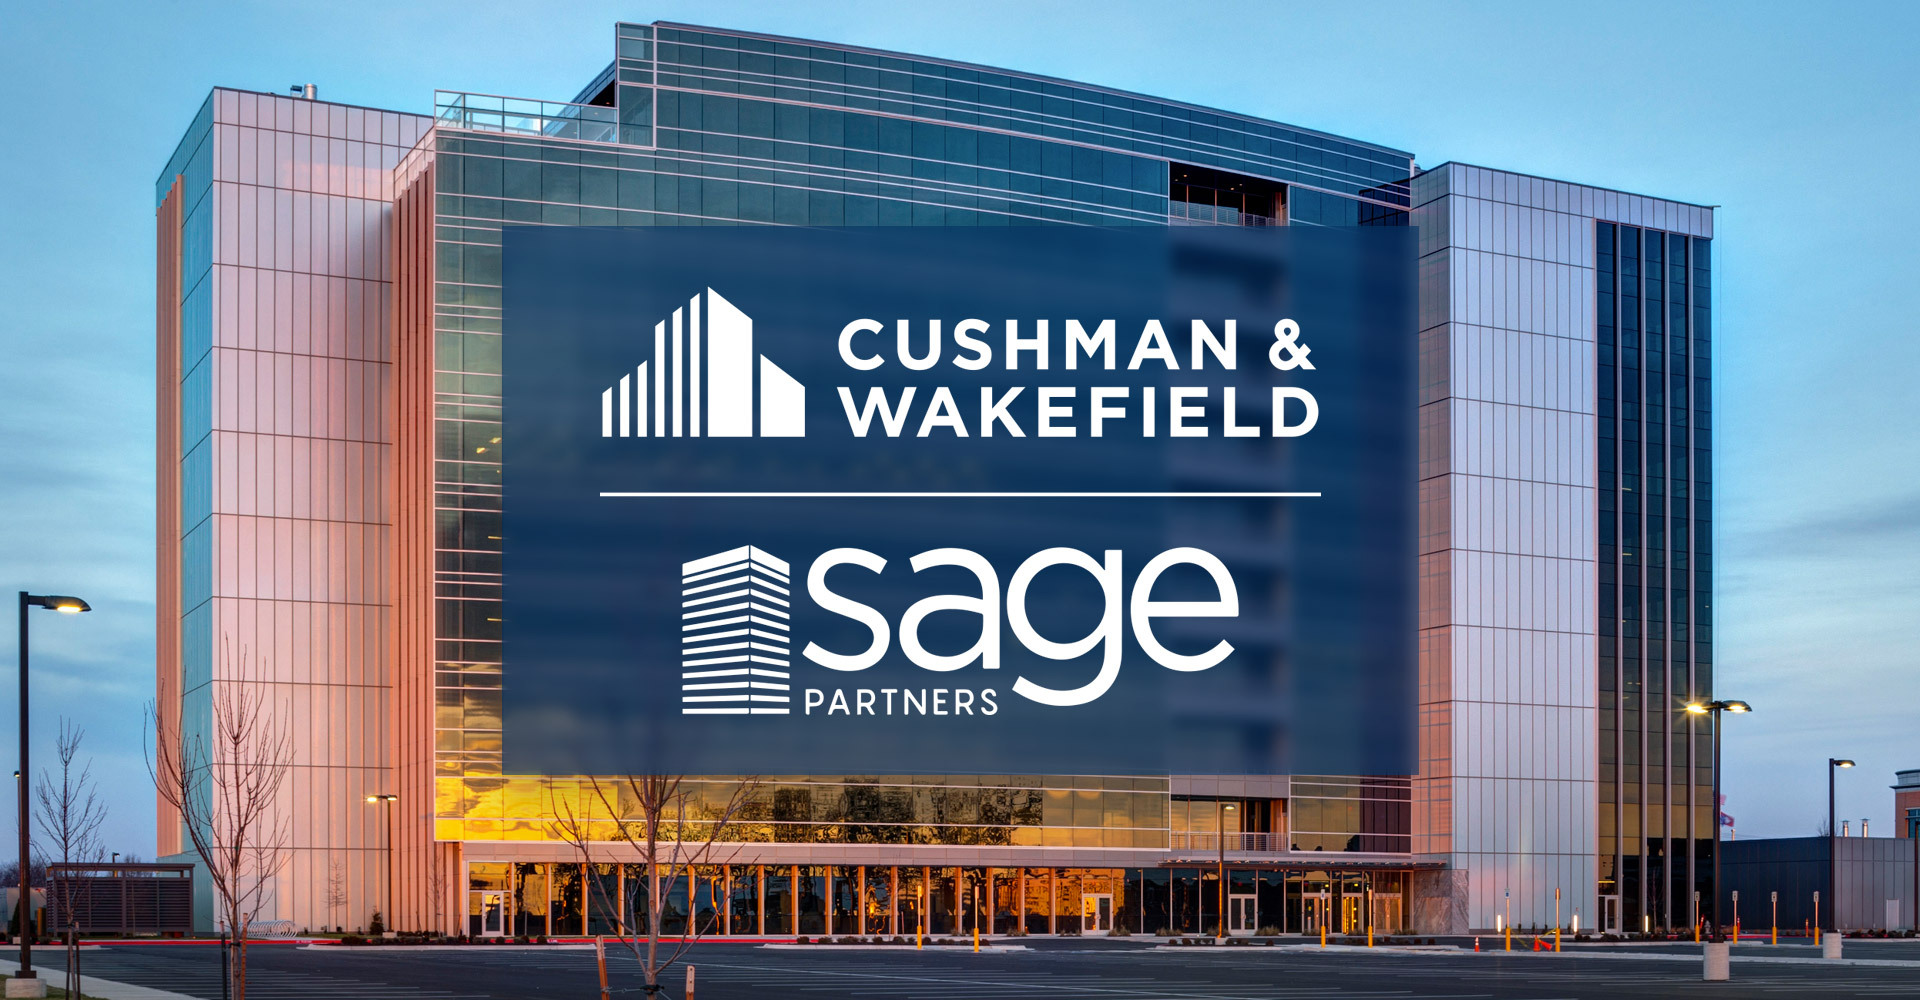 Cushman & Wakefield Sage Partners logo and Hunt Tower exterior building